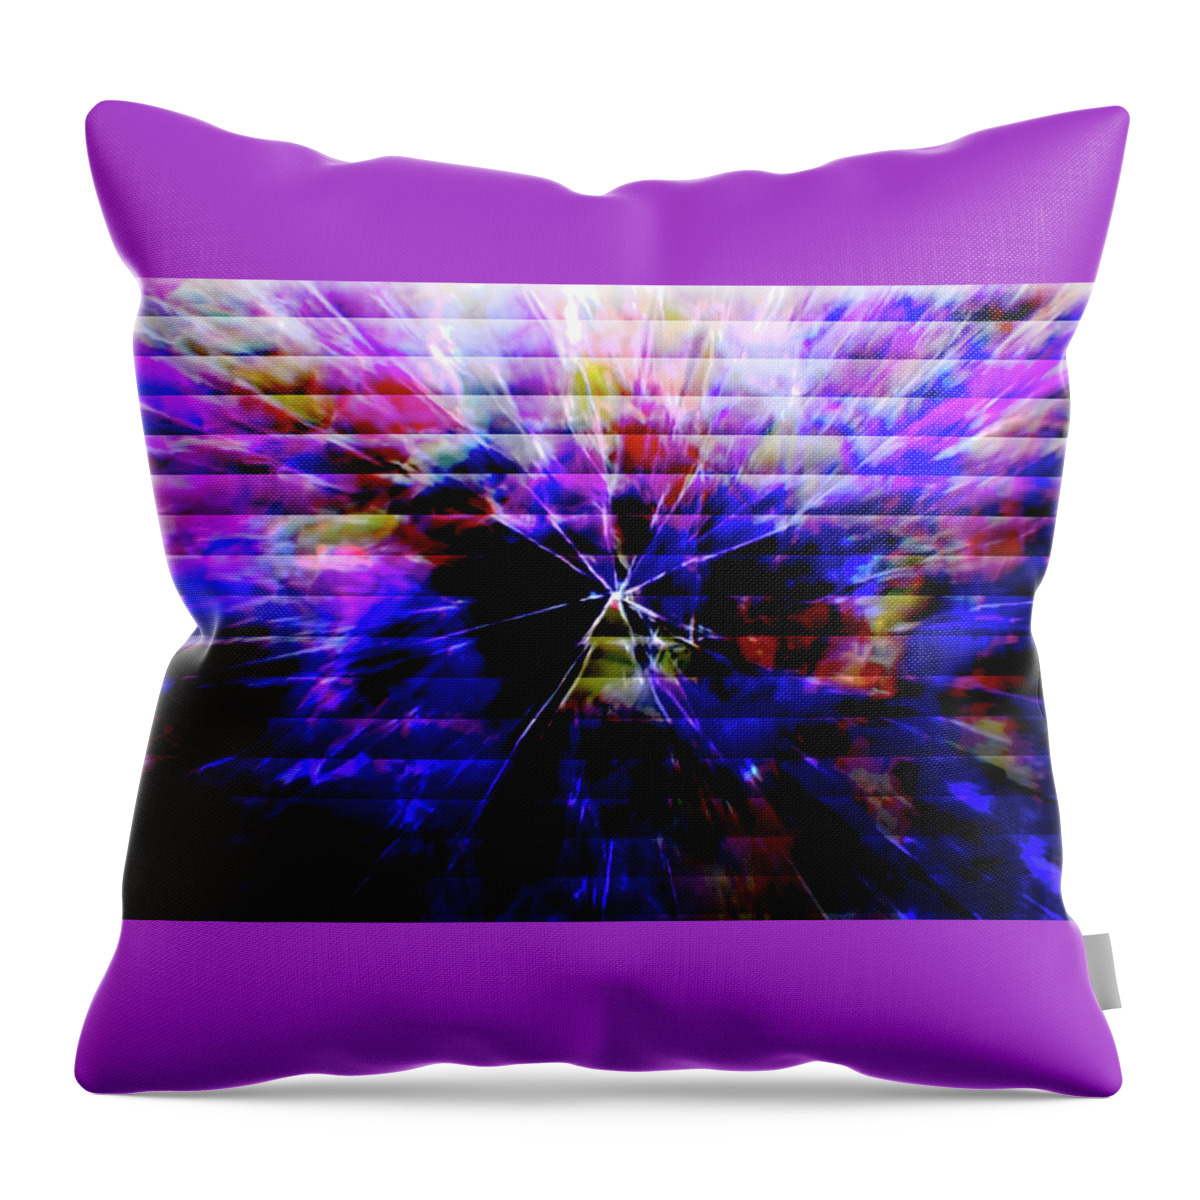 Abstract Throw Pillow featuring the digital art Cracked Abstract Blue by Carol Crisafi